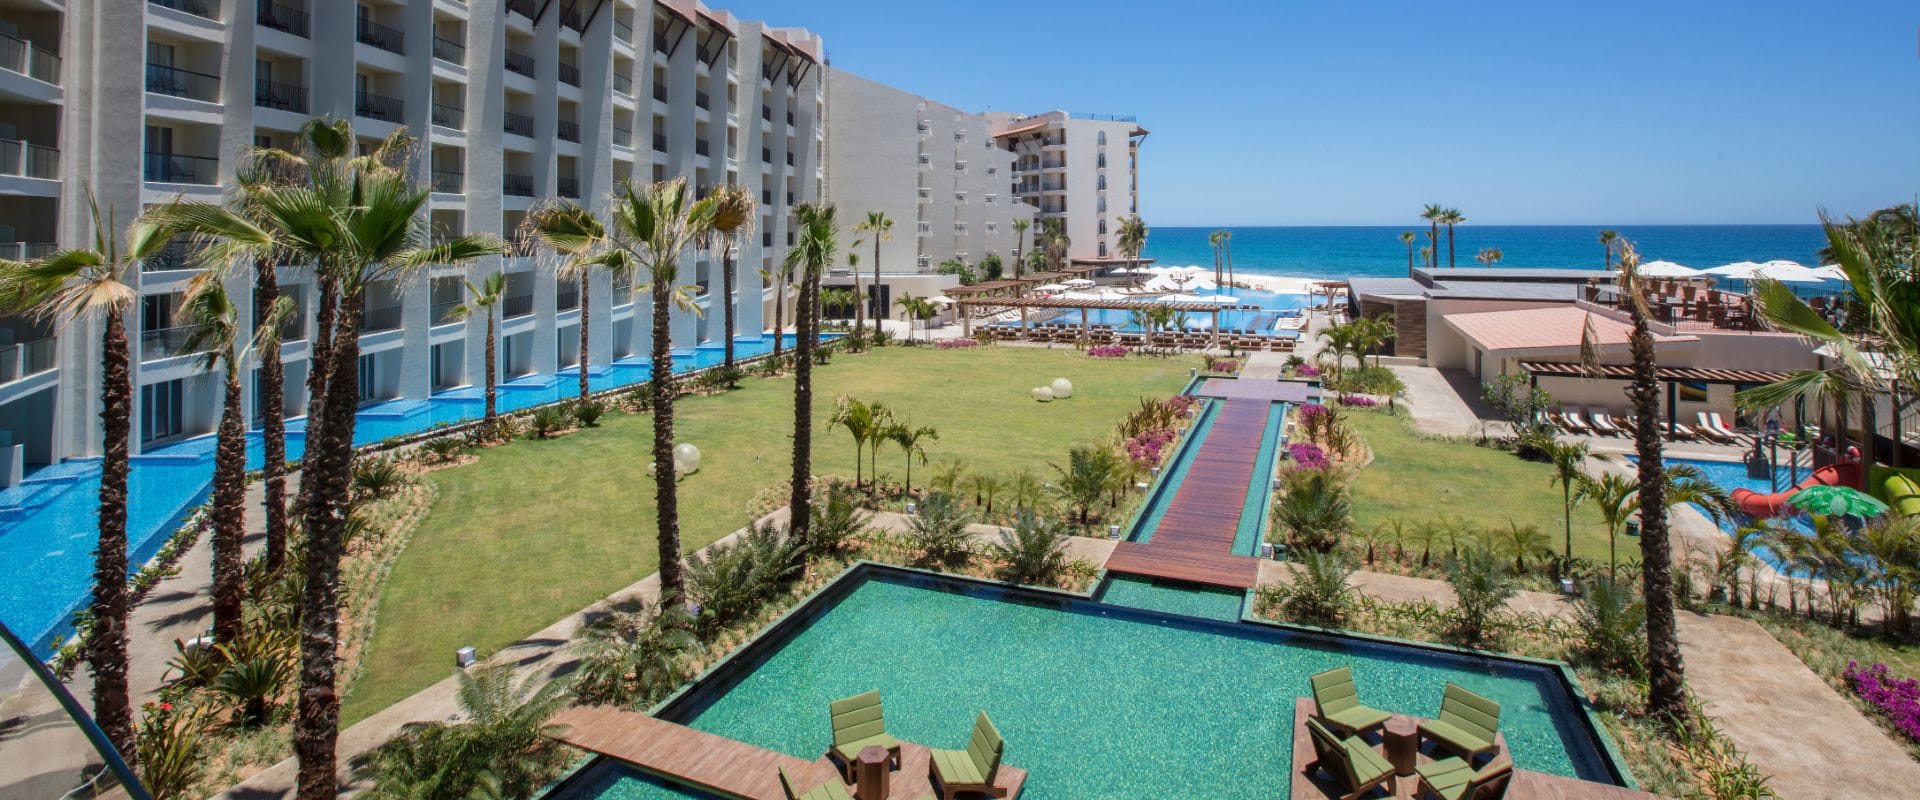 Kid Friendly All-Inclusive Resorts In Cabo San Lucas